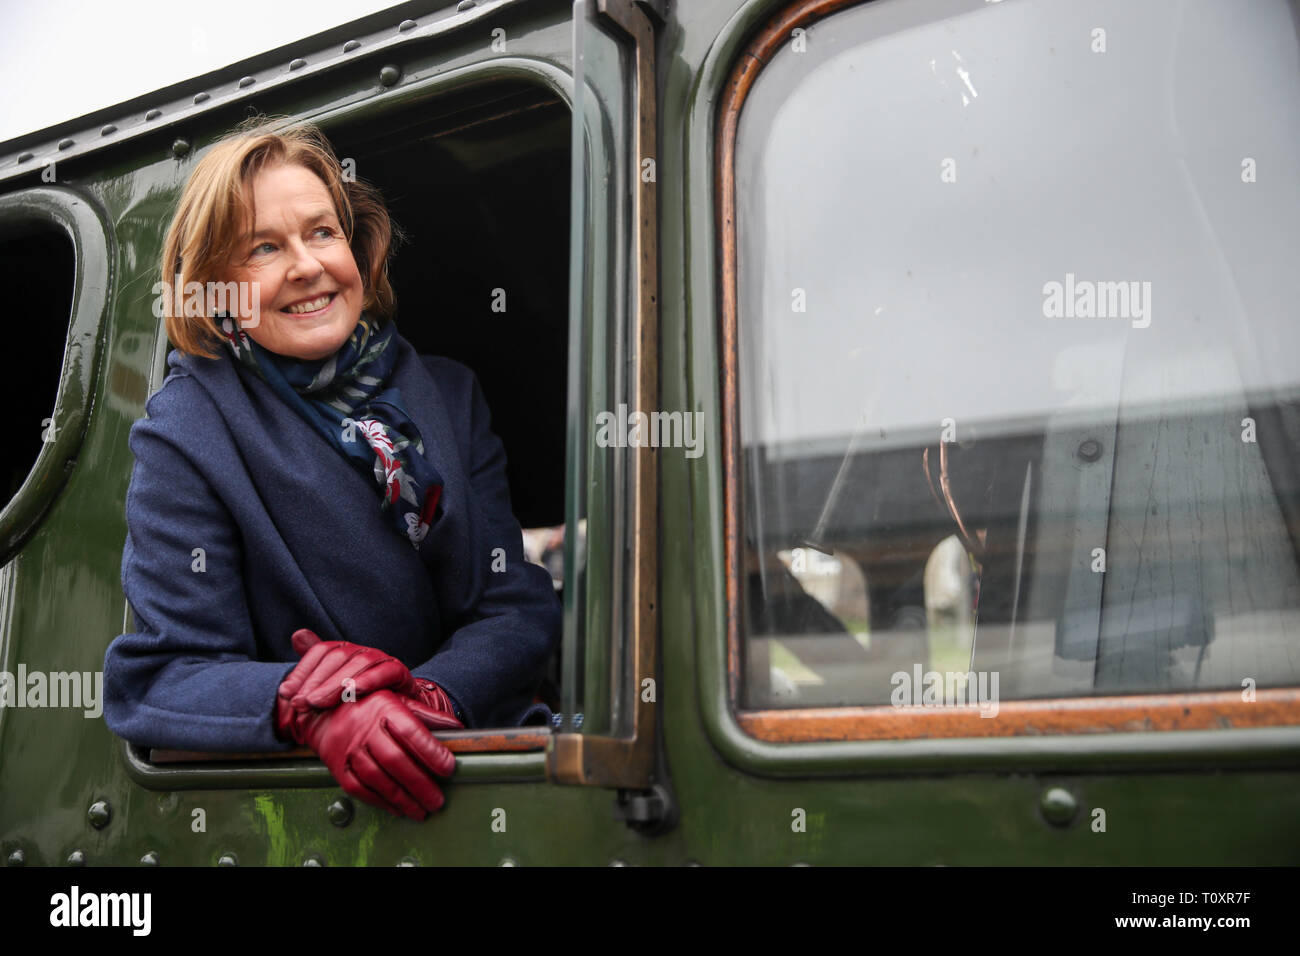 Penny Vaudoyer, the daughter of Alan Pegler who saved the Flying Scotsman from the scrap heap, at Swanage Railway in Dorset on board the Flying Scotsman ahead of its first trip. The Flying Scotsman was purchased by the National Railway Museum in 2004, and restored in a £4.2 million, ten-year project funded by the National Heritage Memorial Fund and the Heritage Lottery Fund as well as from public donations. Stock Photo